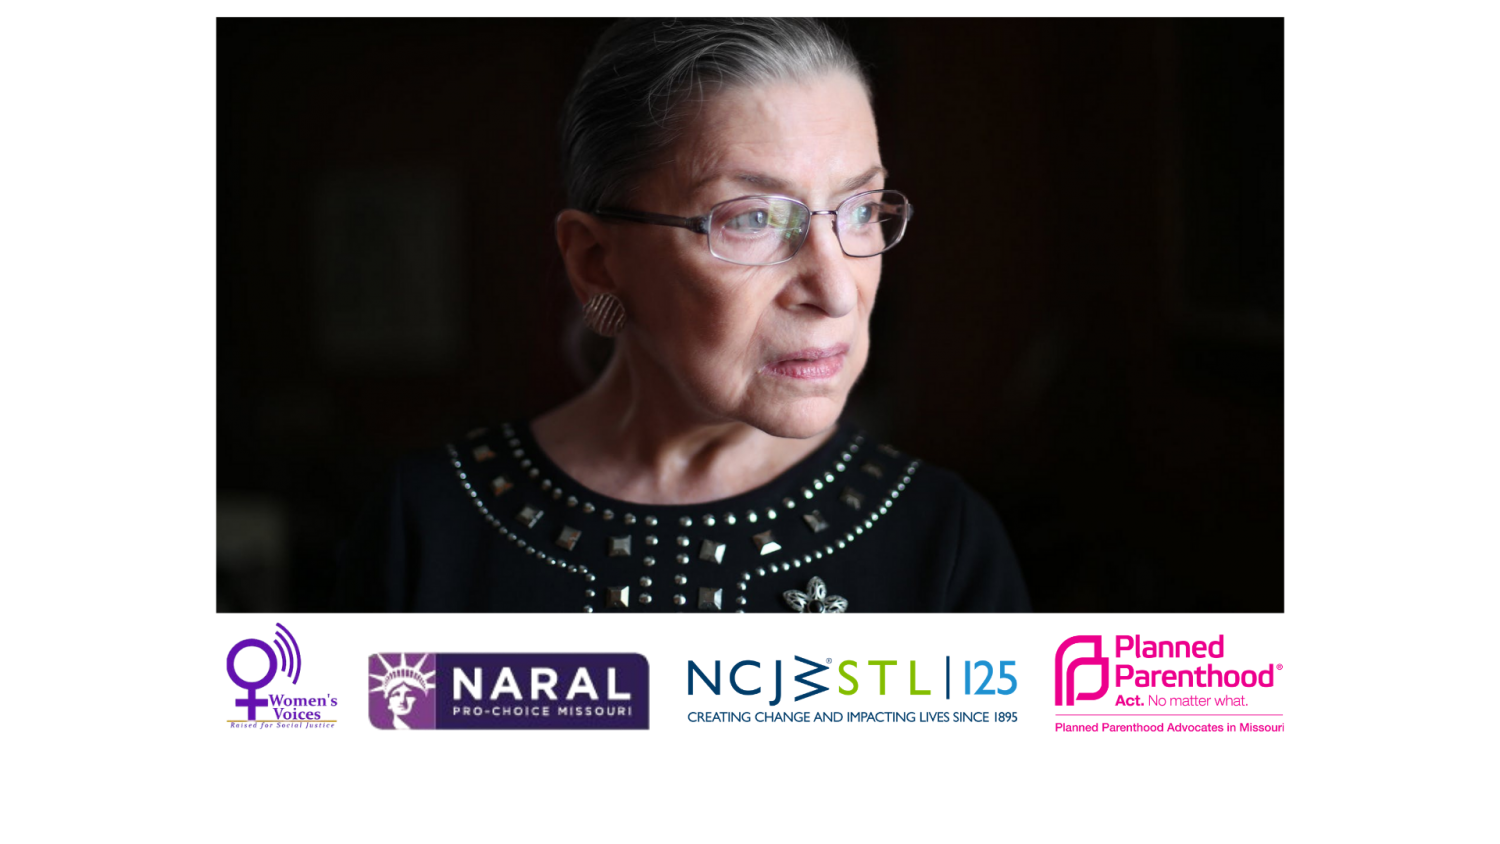 photo of Ruth Bader Ginsberg and logos for Women's Voices, NARAL, NCJWSTL, and Planned Parenthood